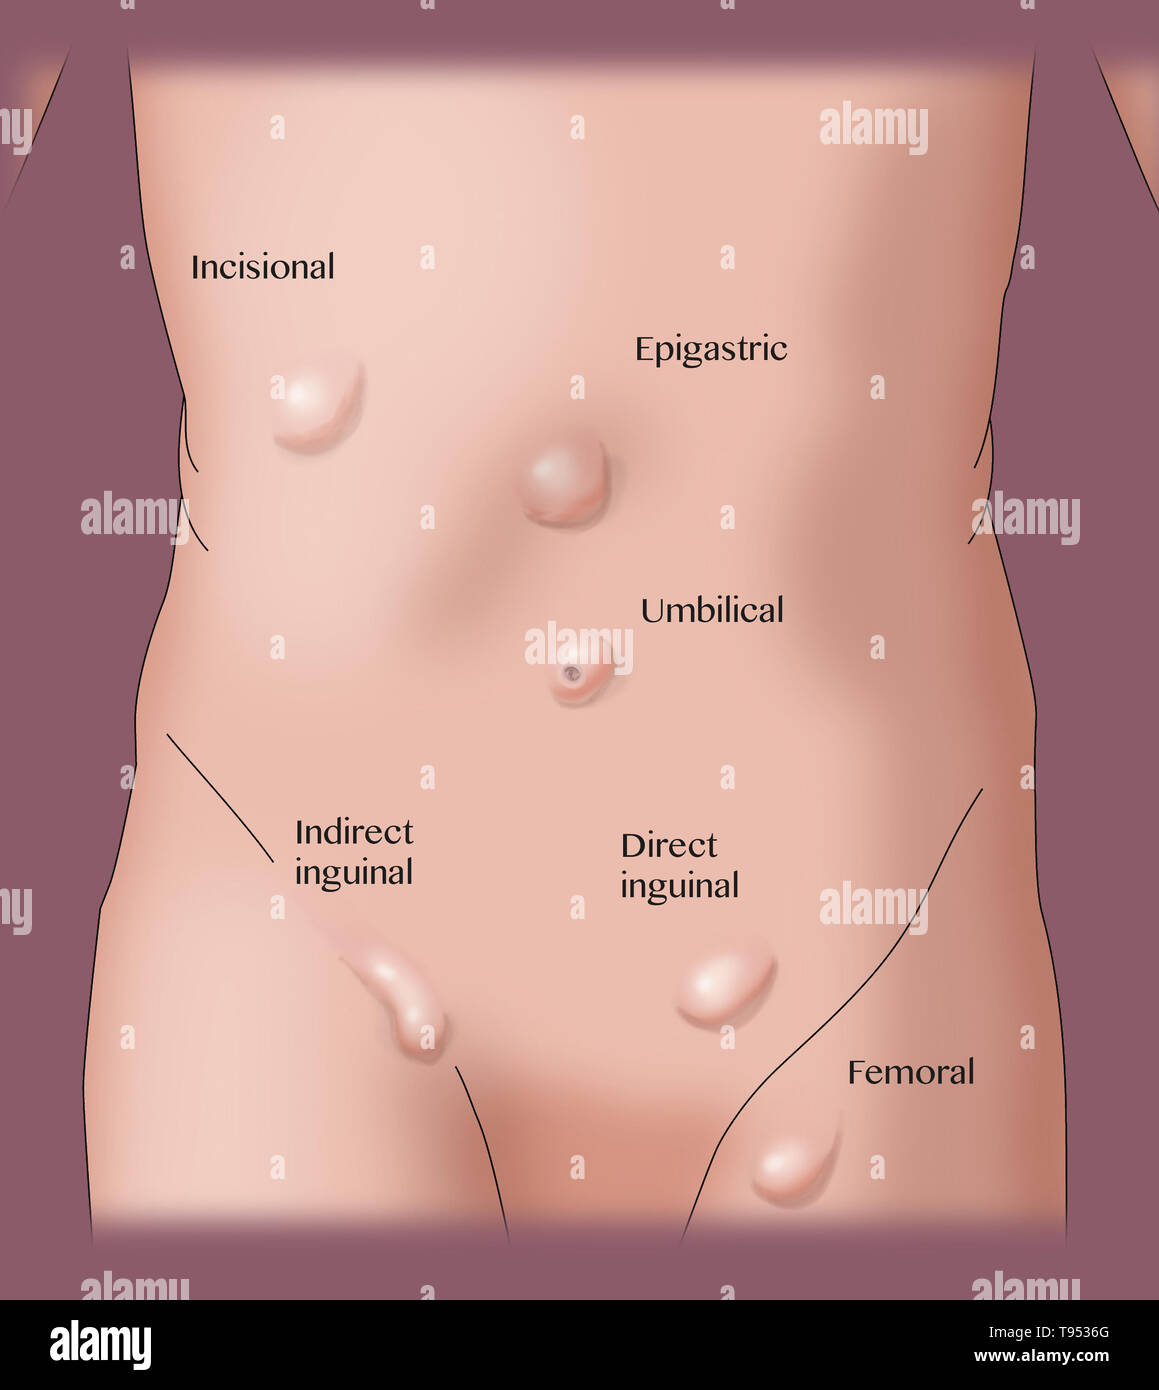 An illustration showing the various types of hernias. Stock Photo